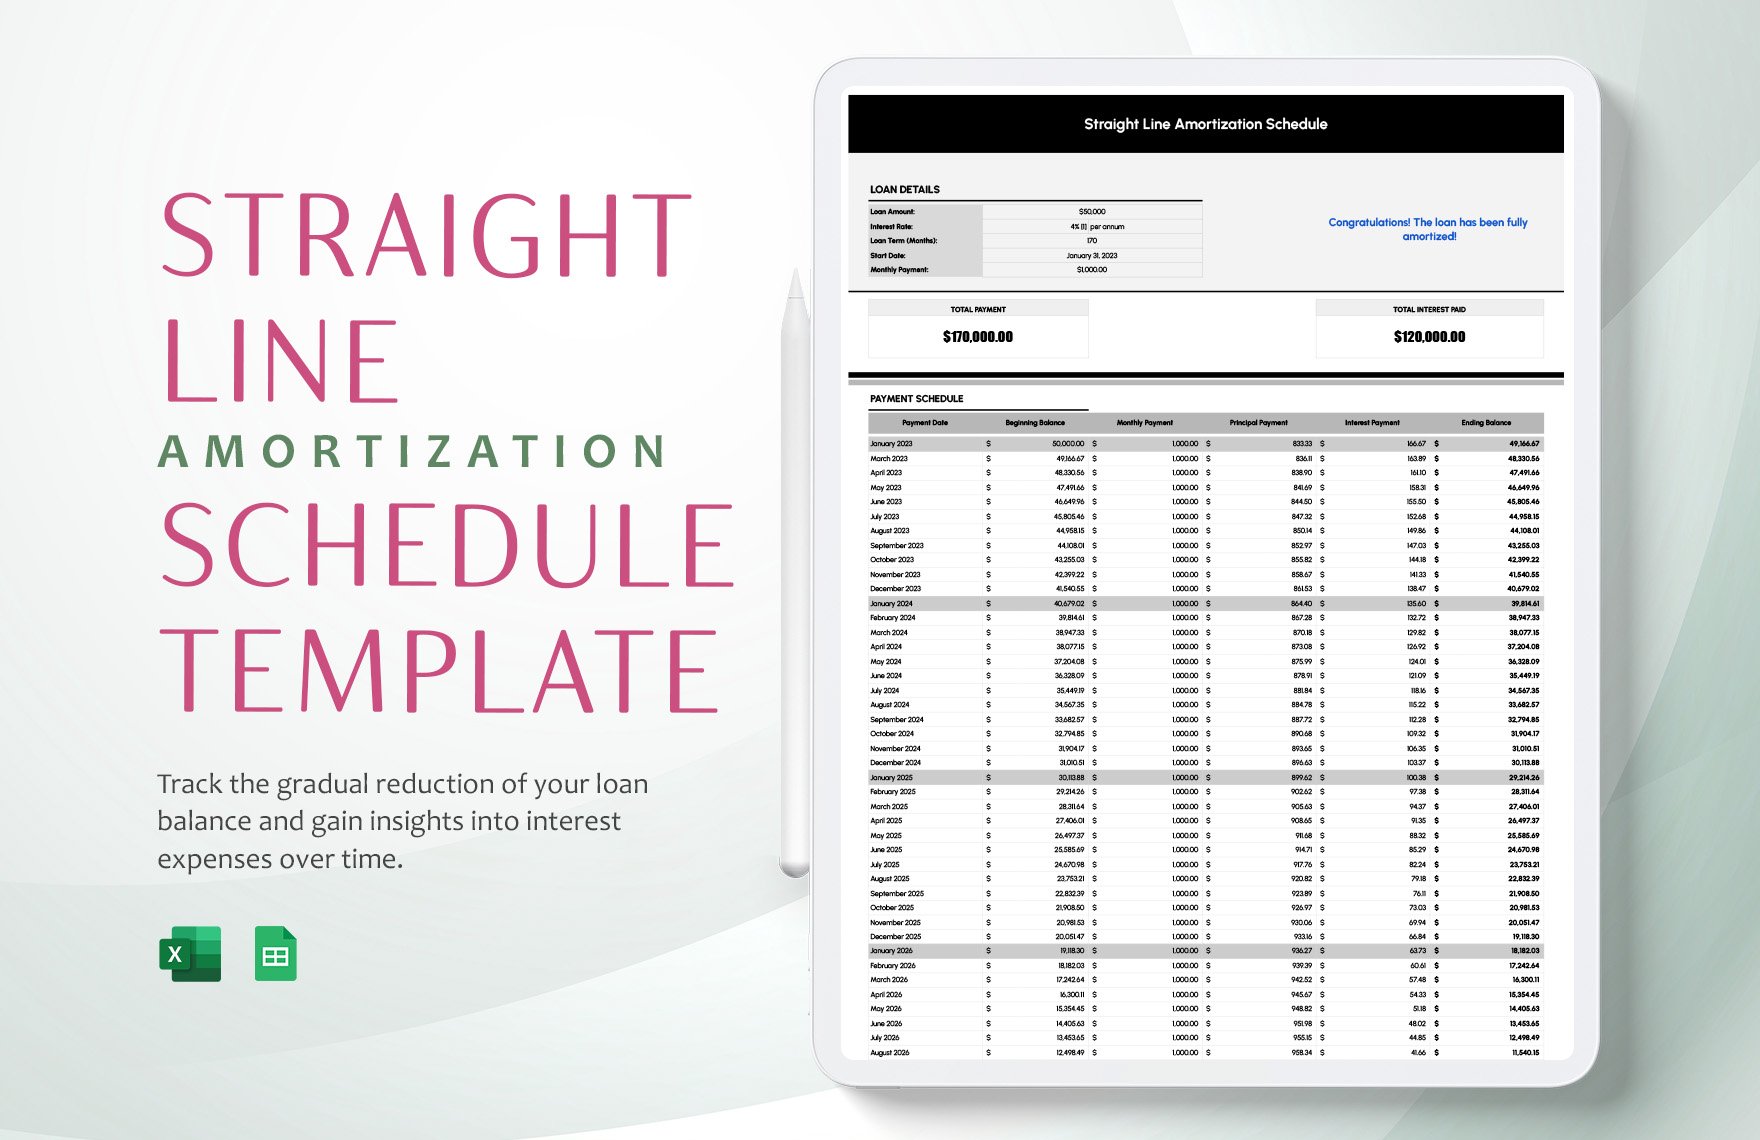 Straight Line Amortization Schedule Template in Excel, Google Sheets